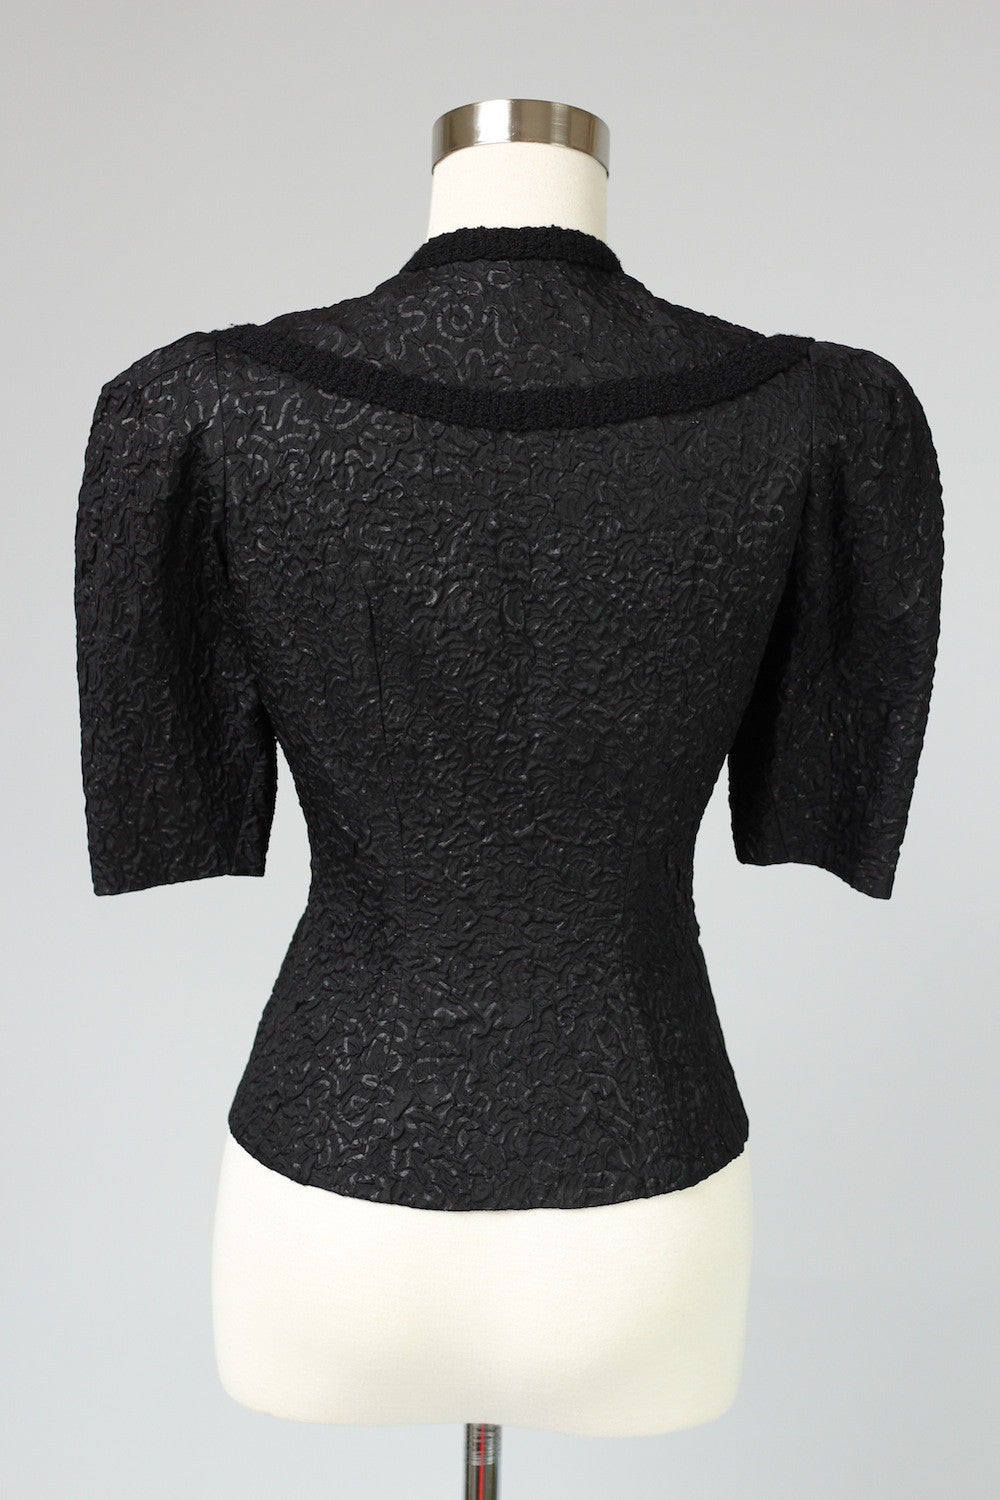 French Avant Garde 1940s Black Crushed Silk Top